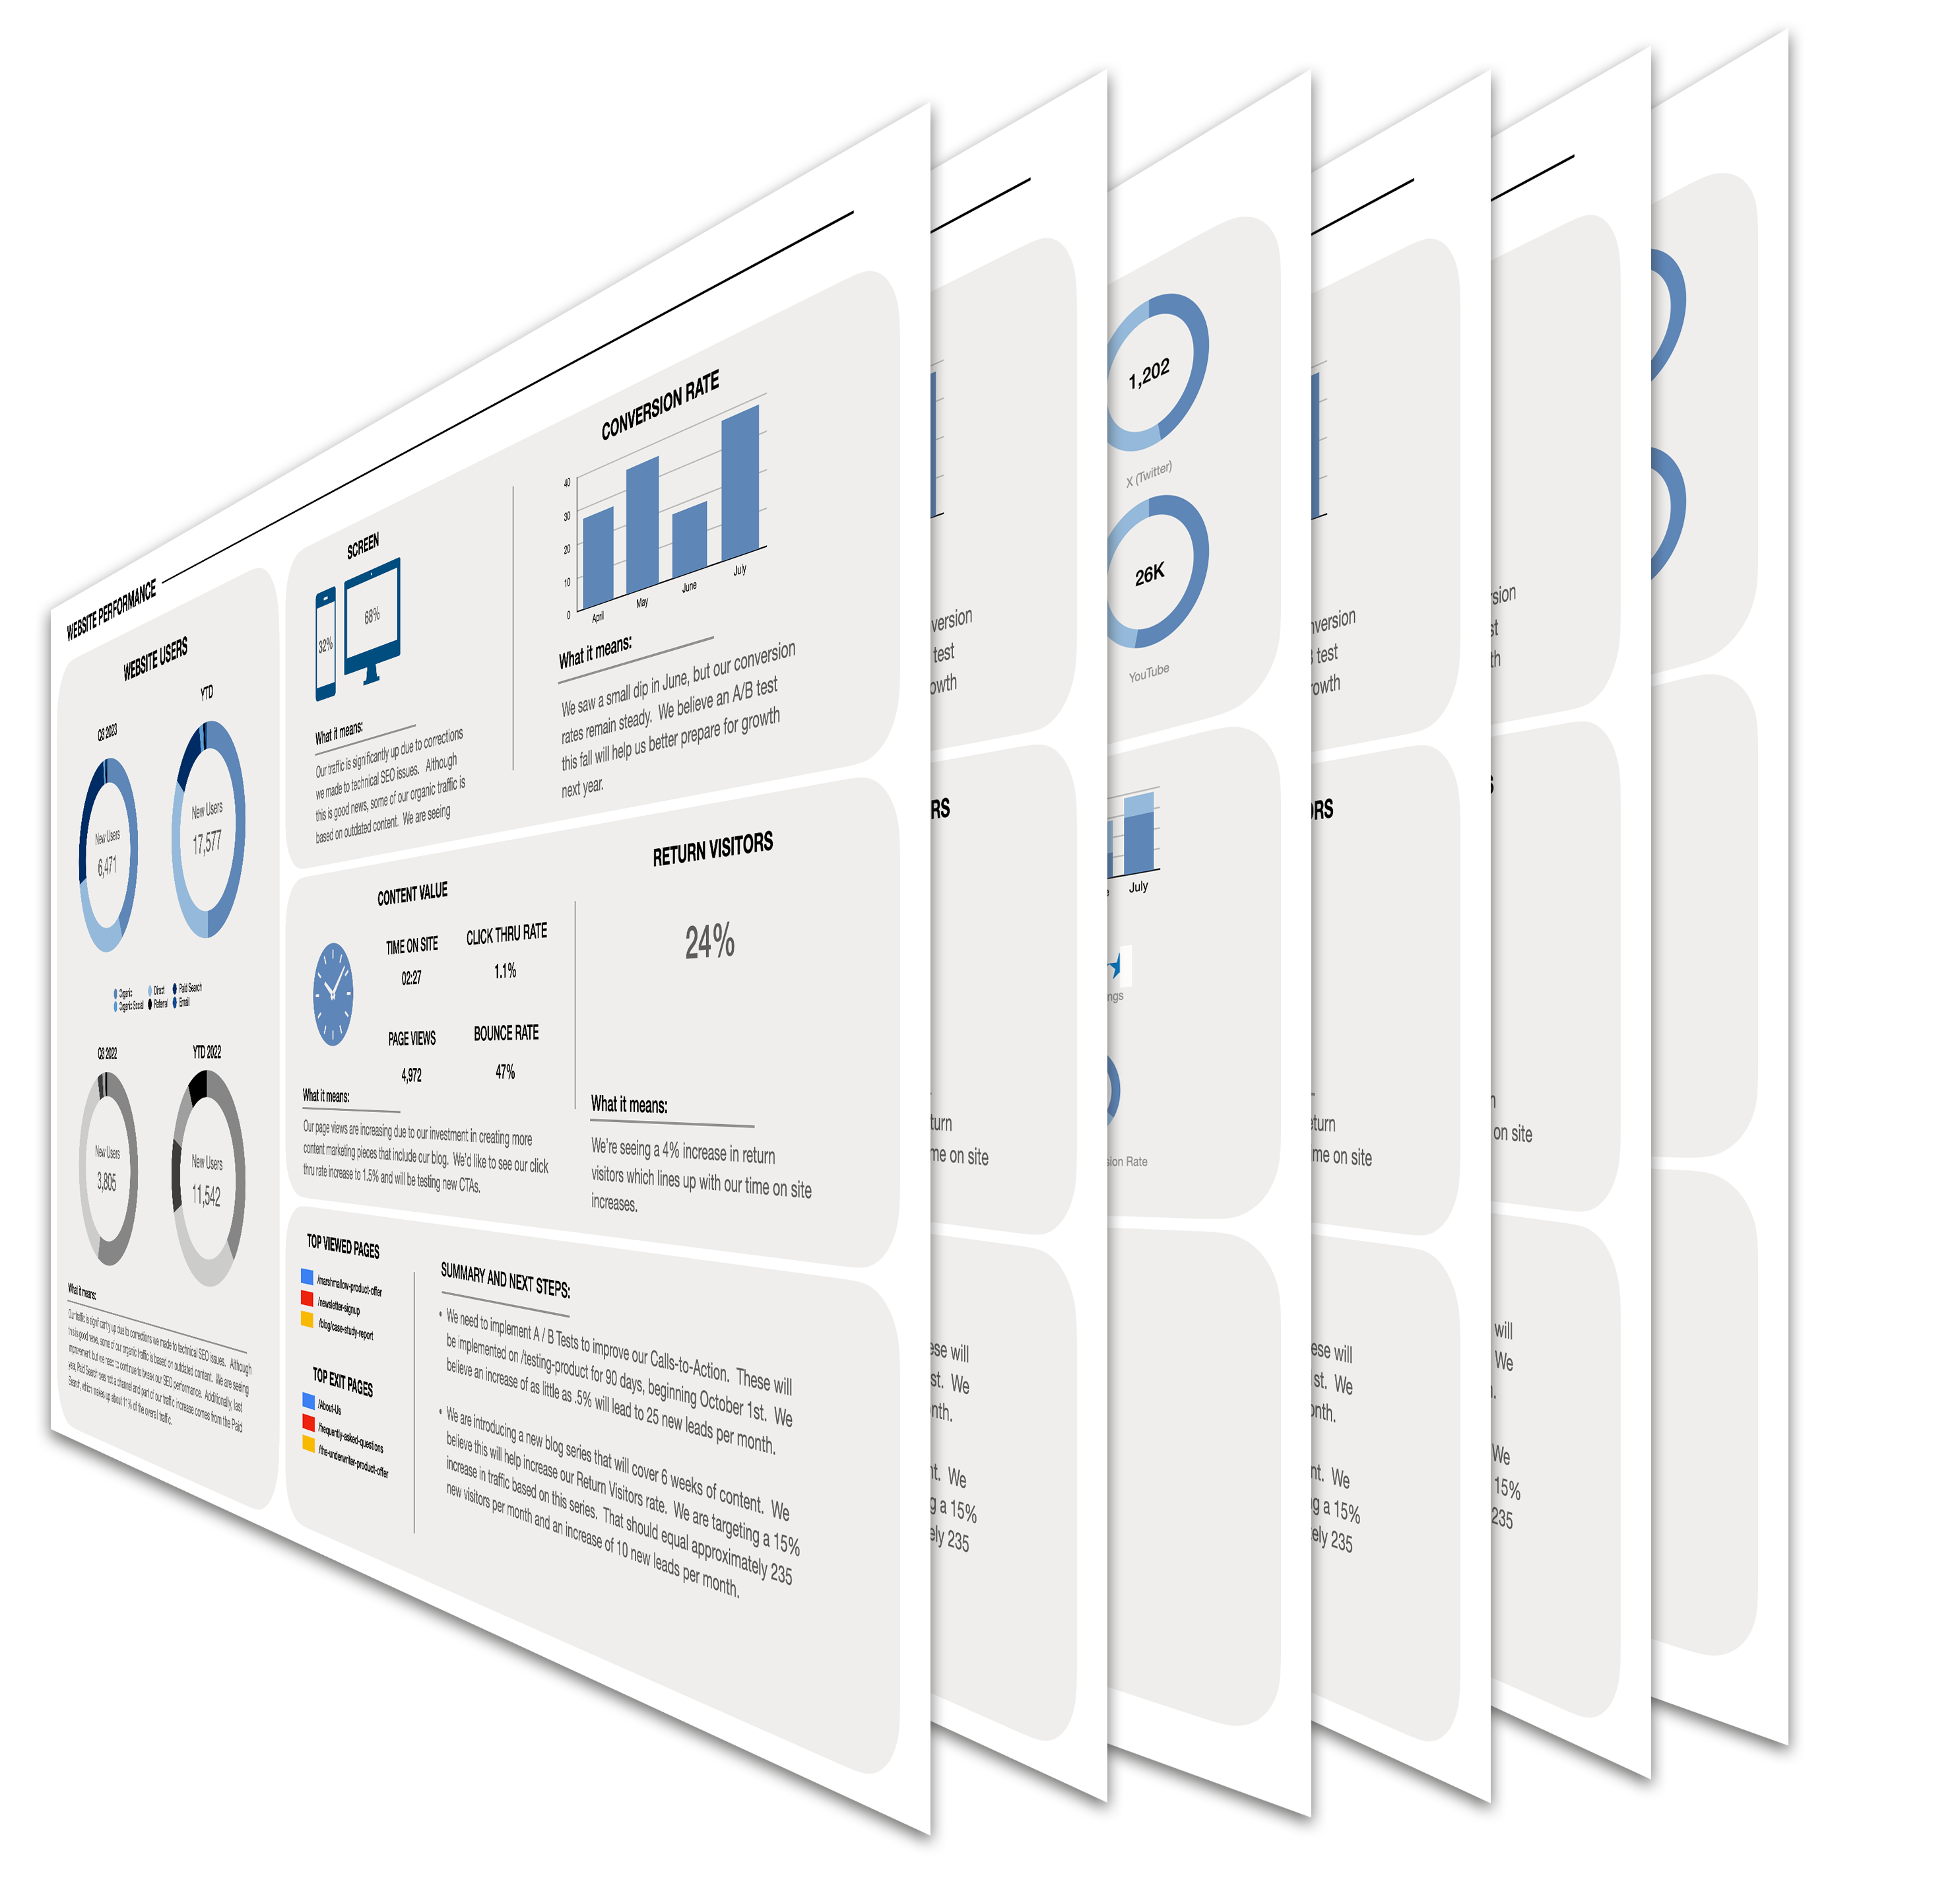 CMO Dashboard to provide marketing reports with financial impact